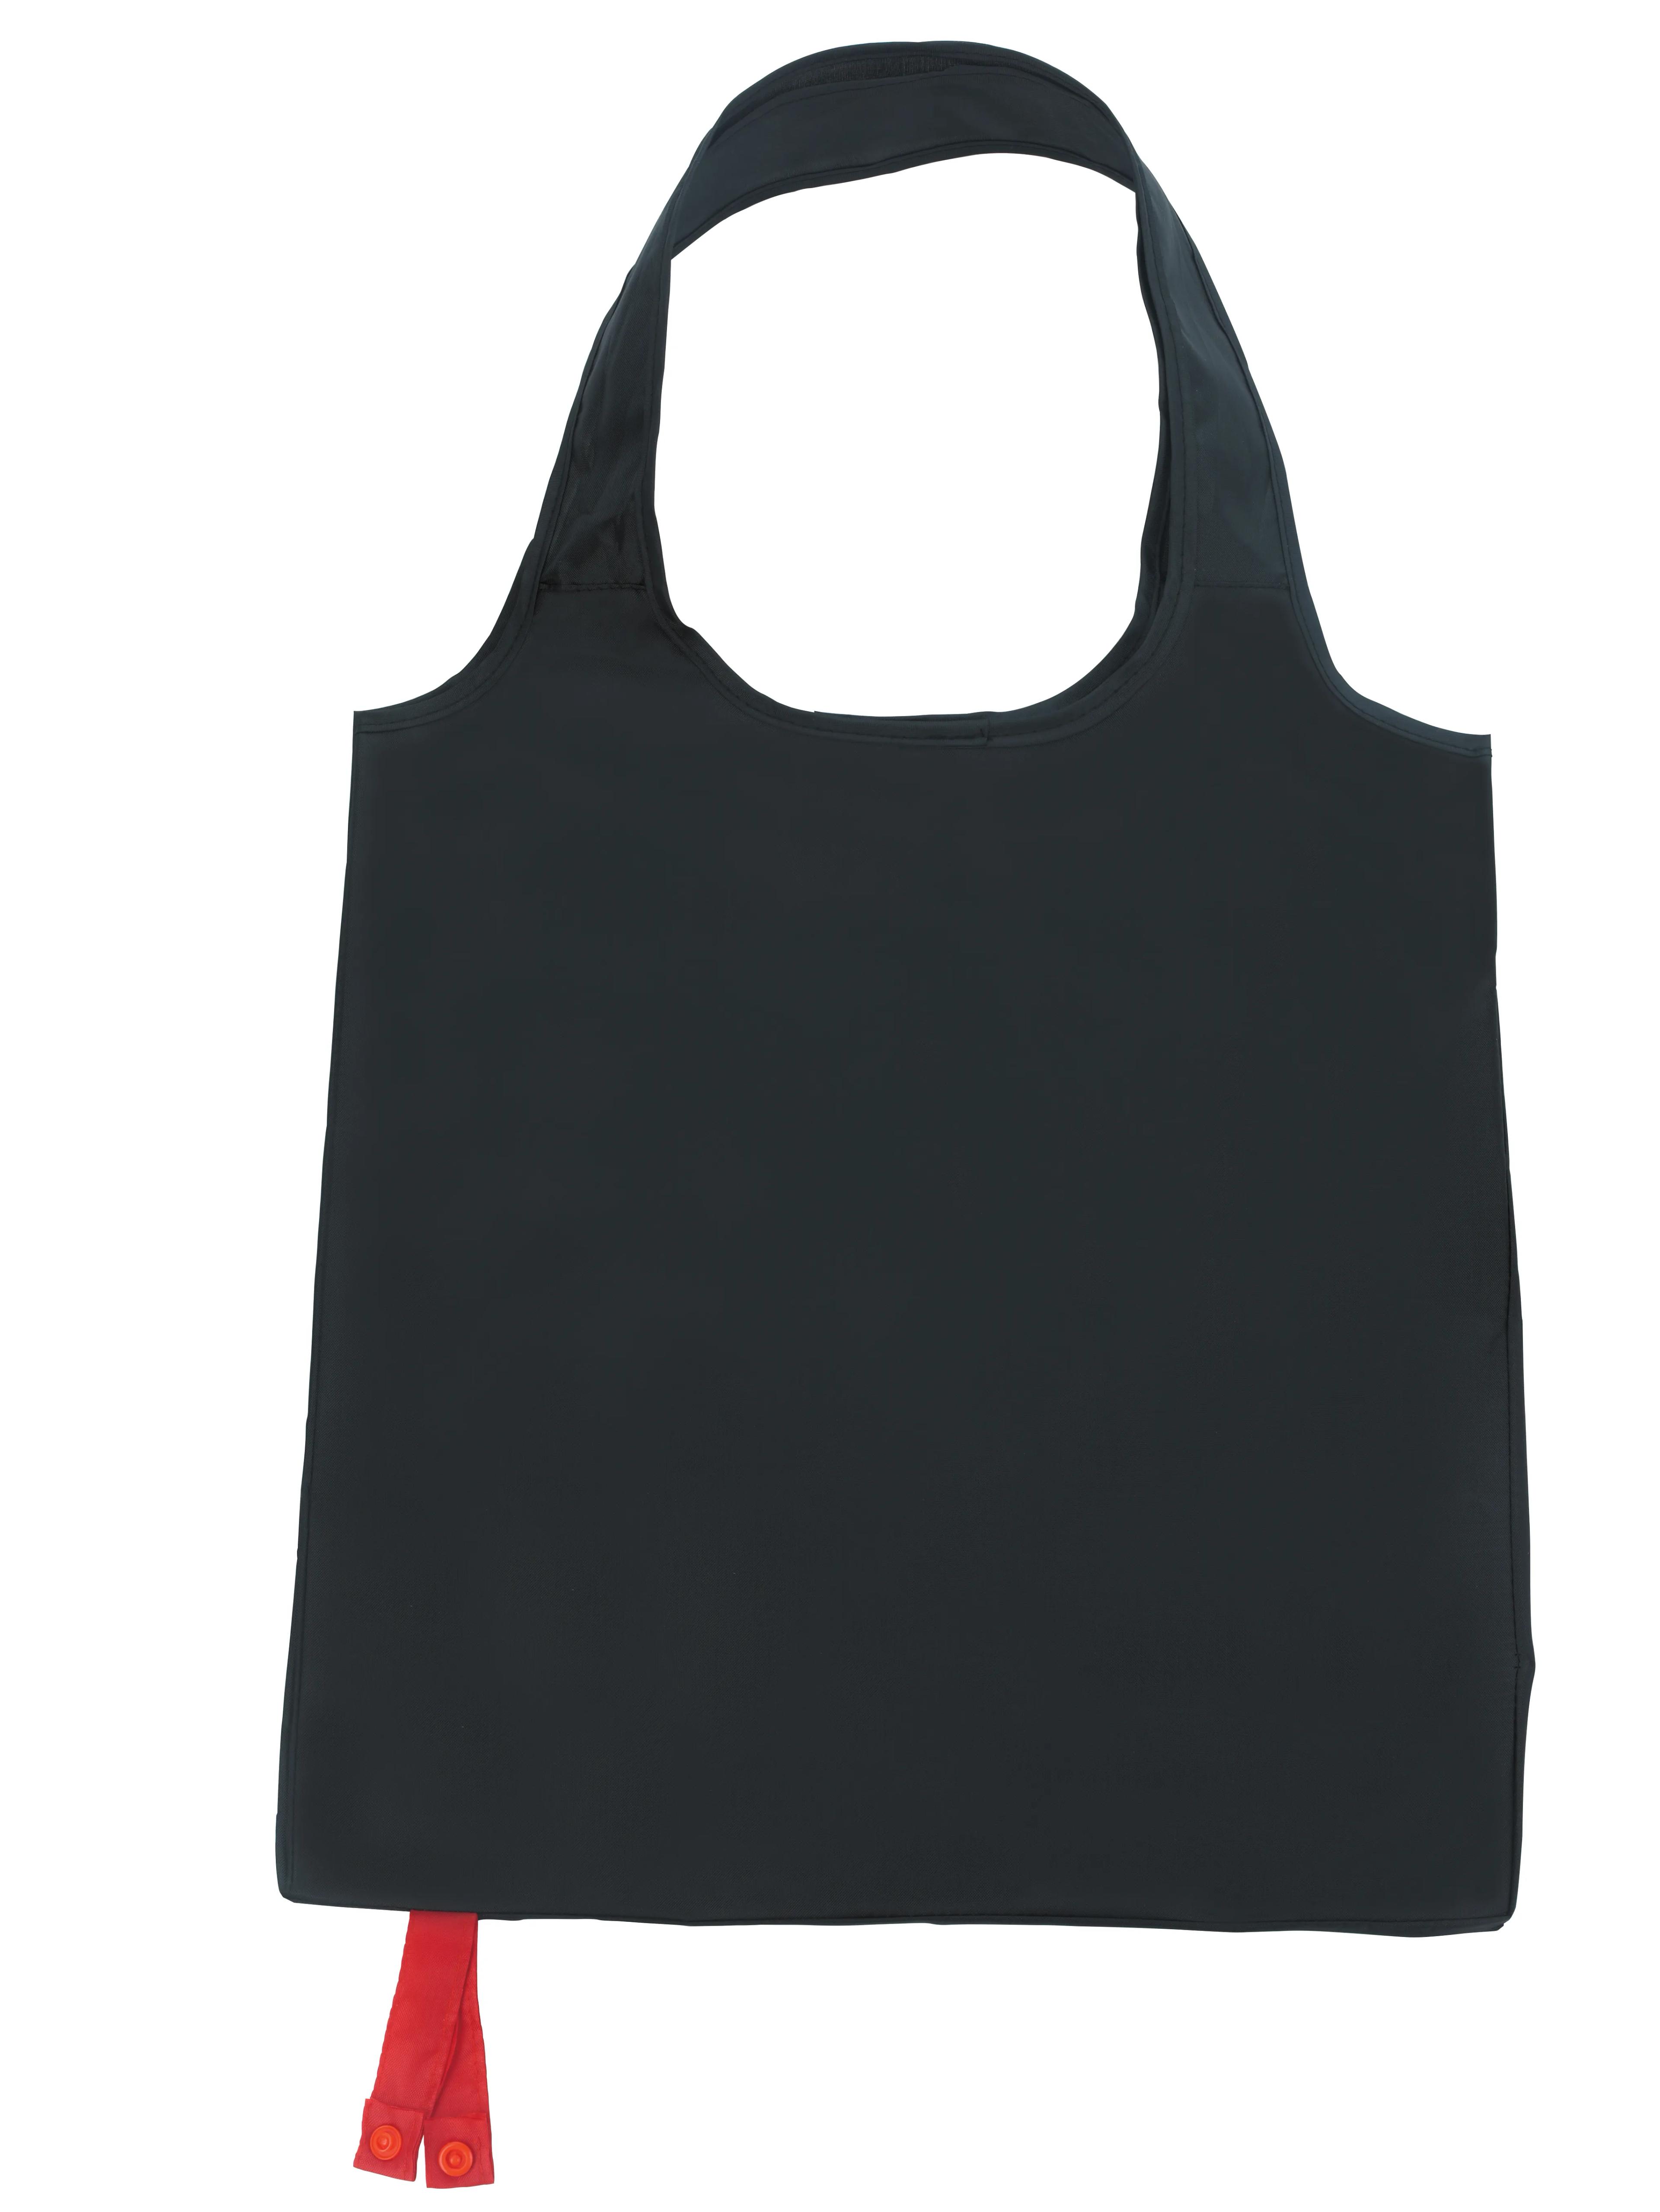 Reusable Foldable Tote 2 of 11